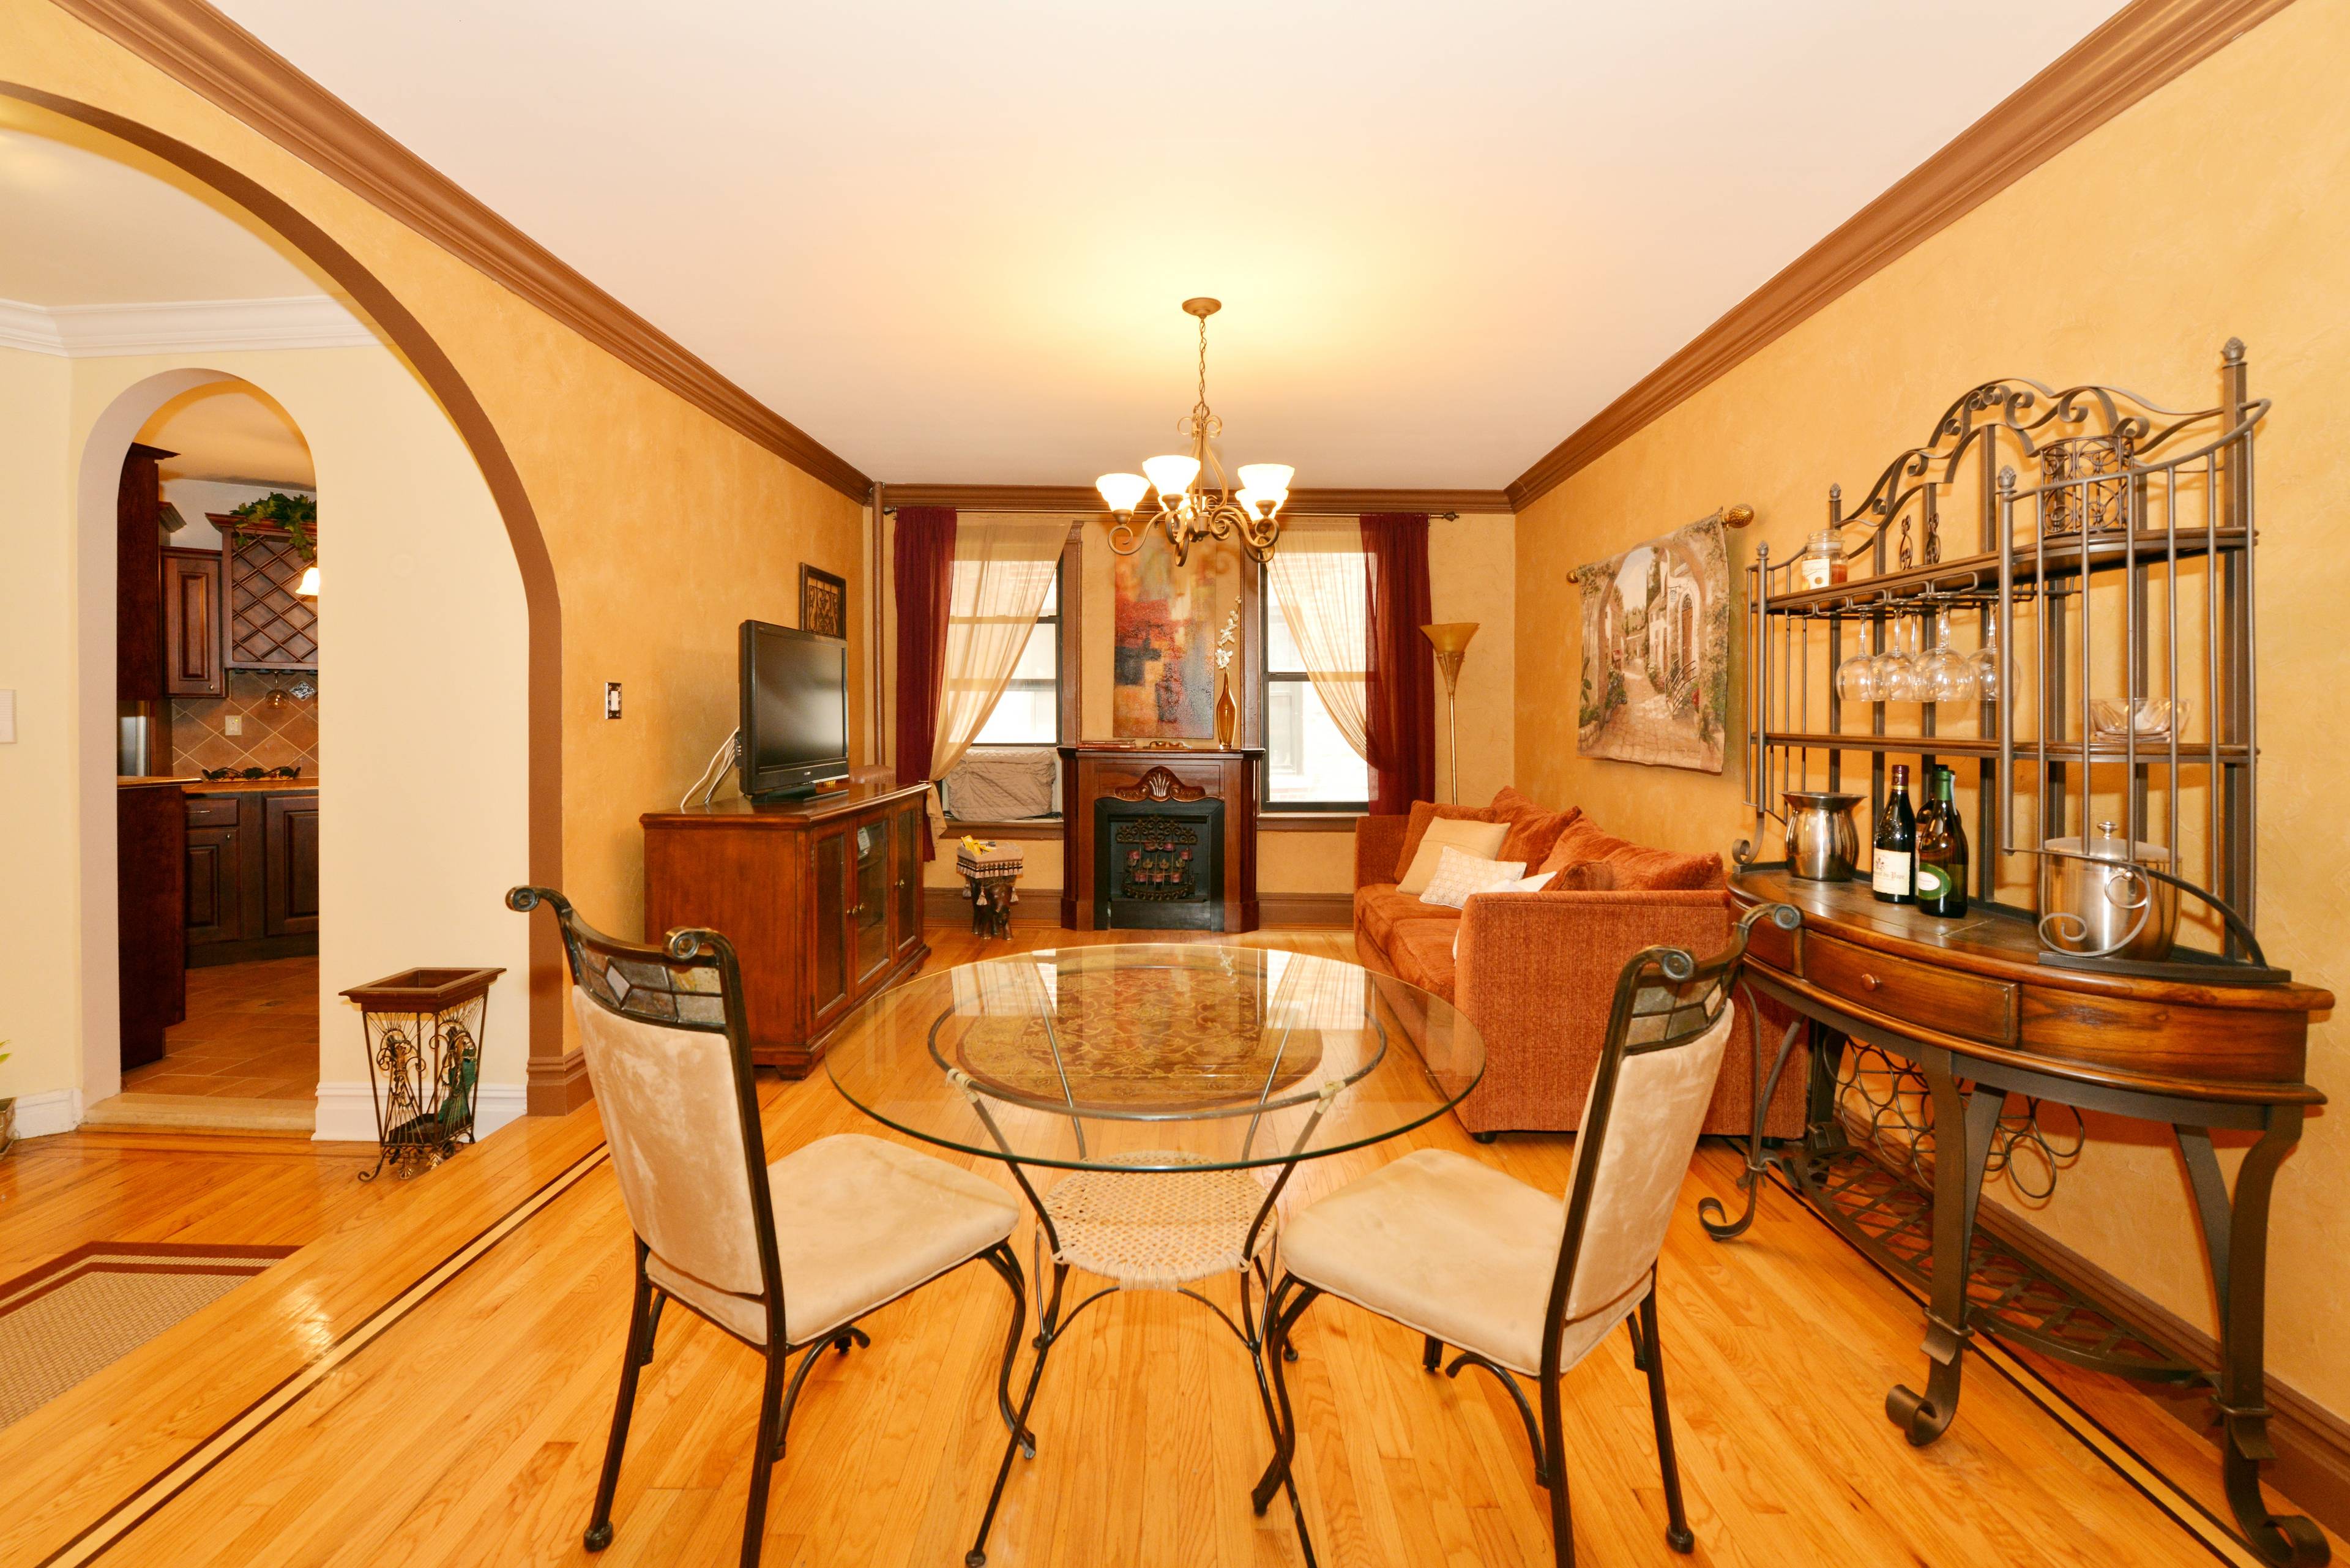 Your Two-Bedroom Mediterranean Villa on Riverside Drive, Ft. Tryon Park